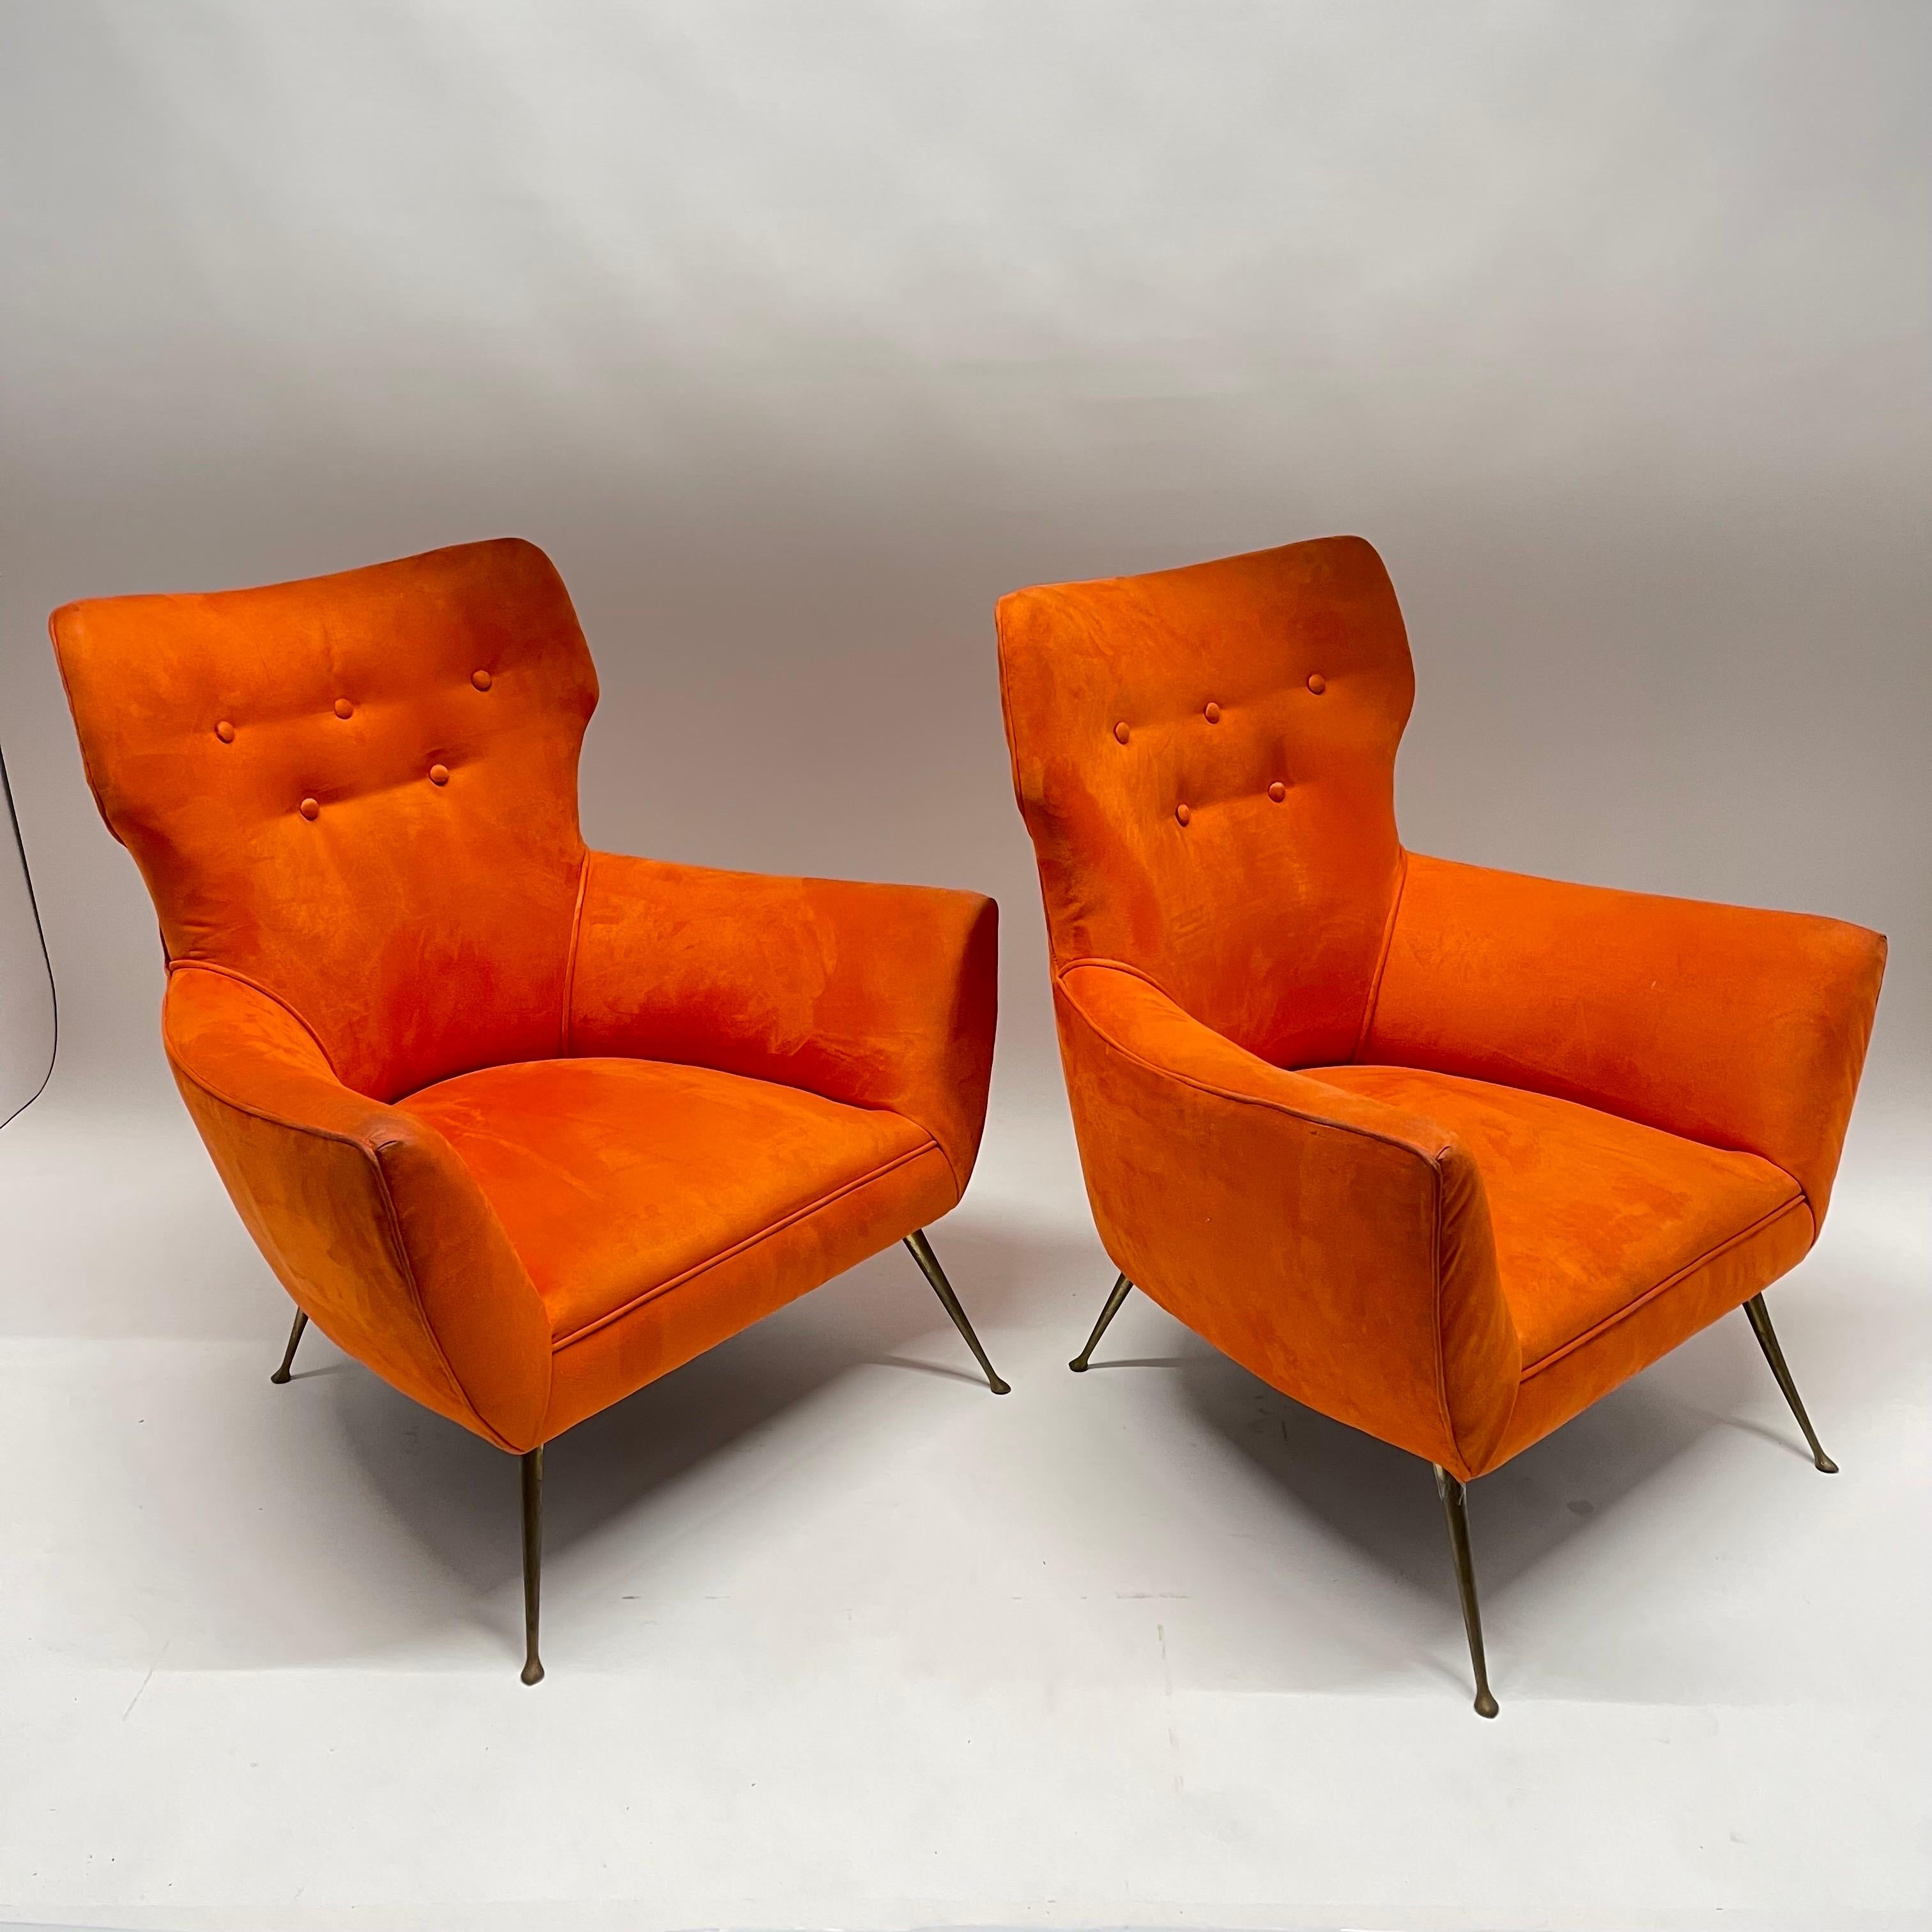 Patinated Pair of Sculptural Italian Mid-Century Modern Armchairs Style of Ponti, Italy